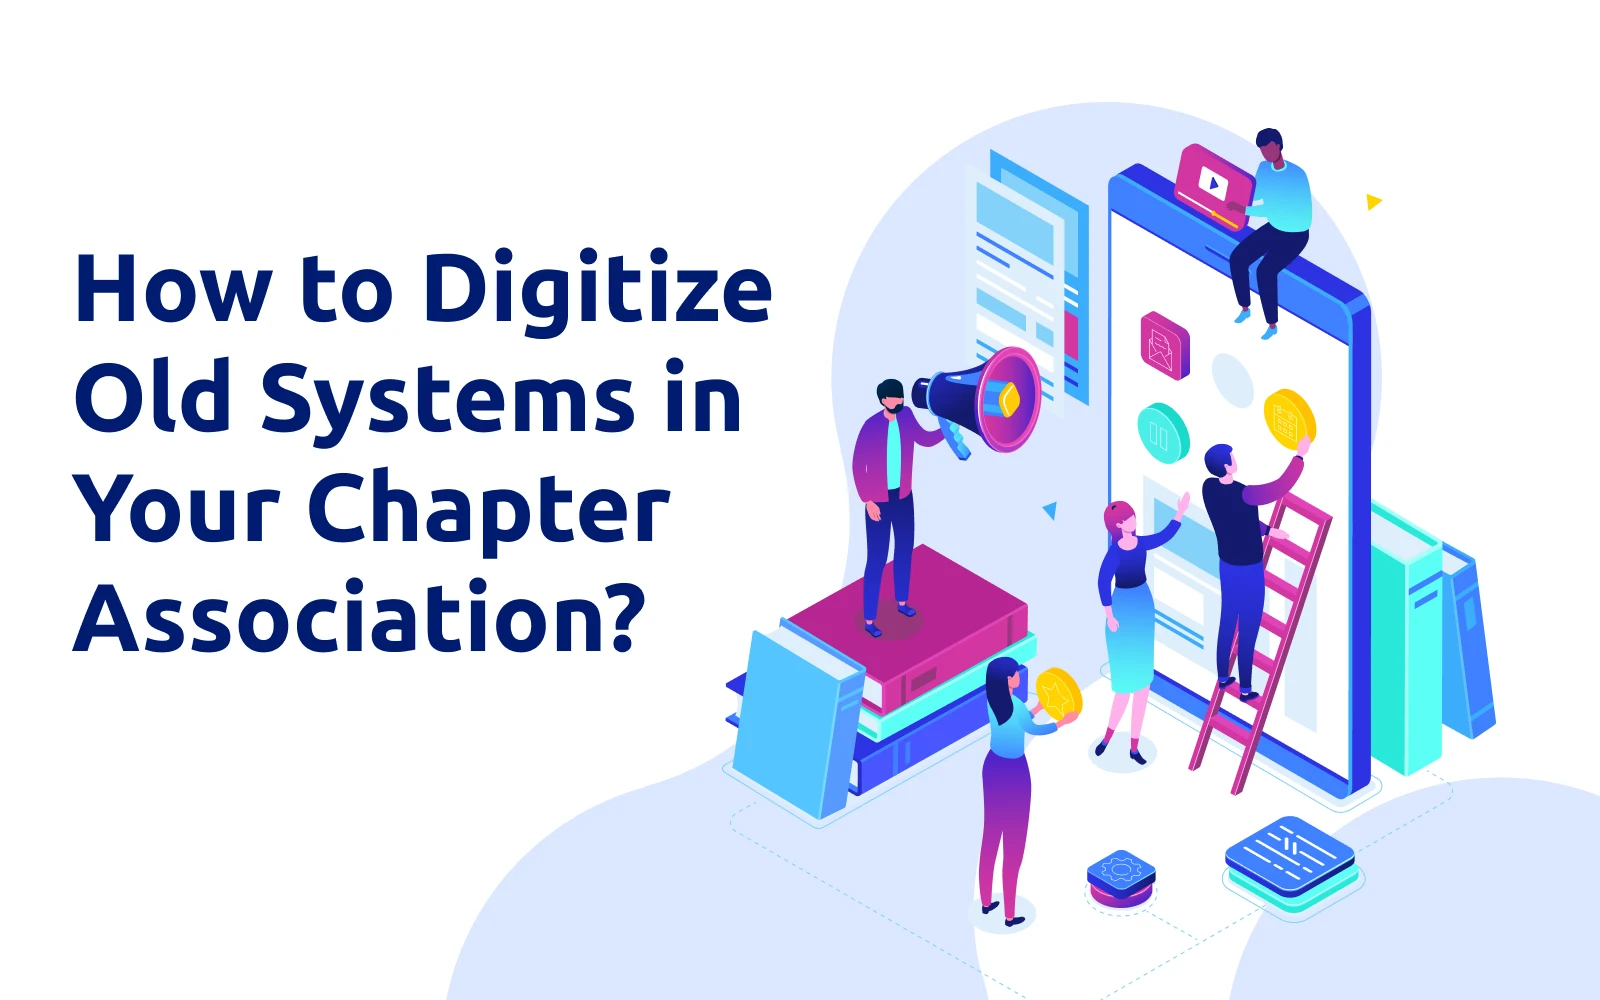 How to Digitize Old Systems in Your Chapter Association?